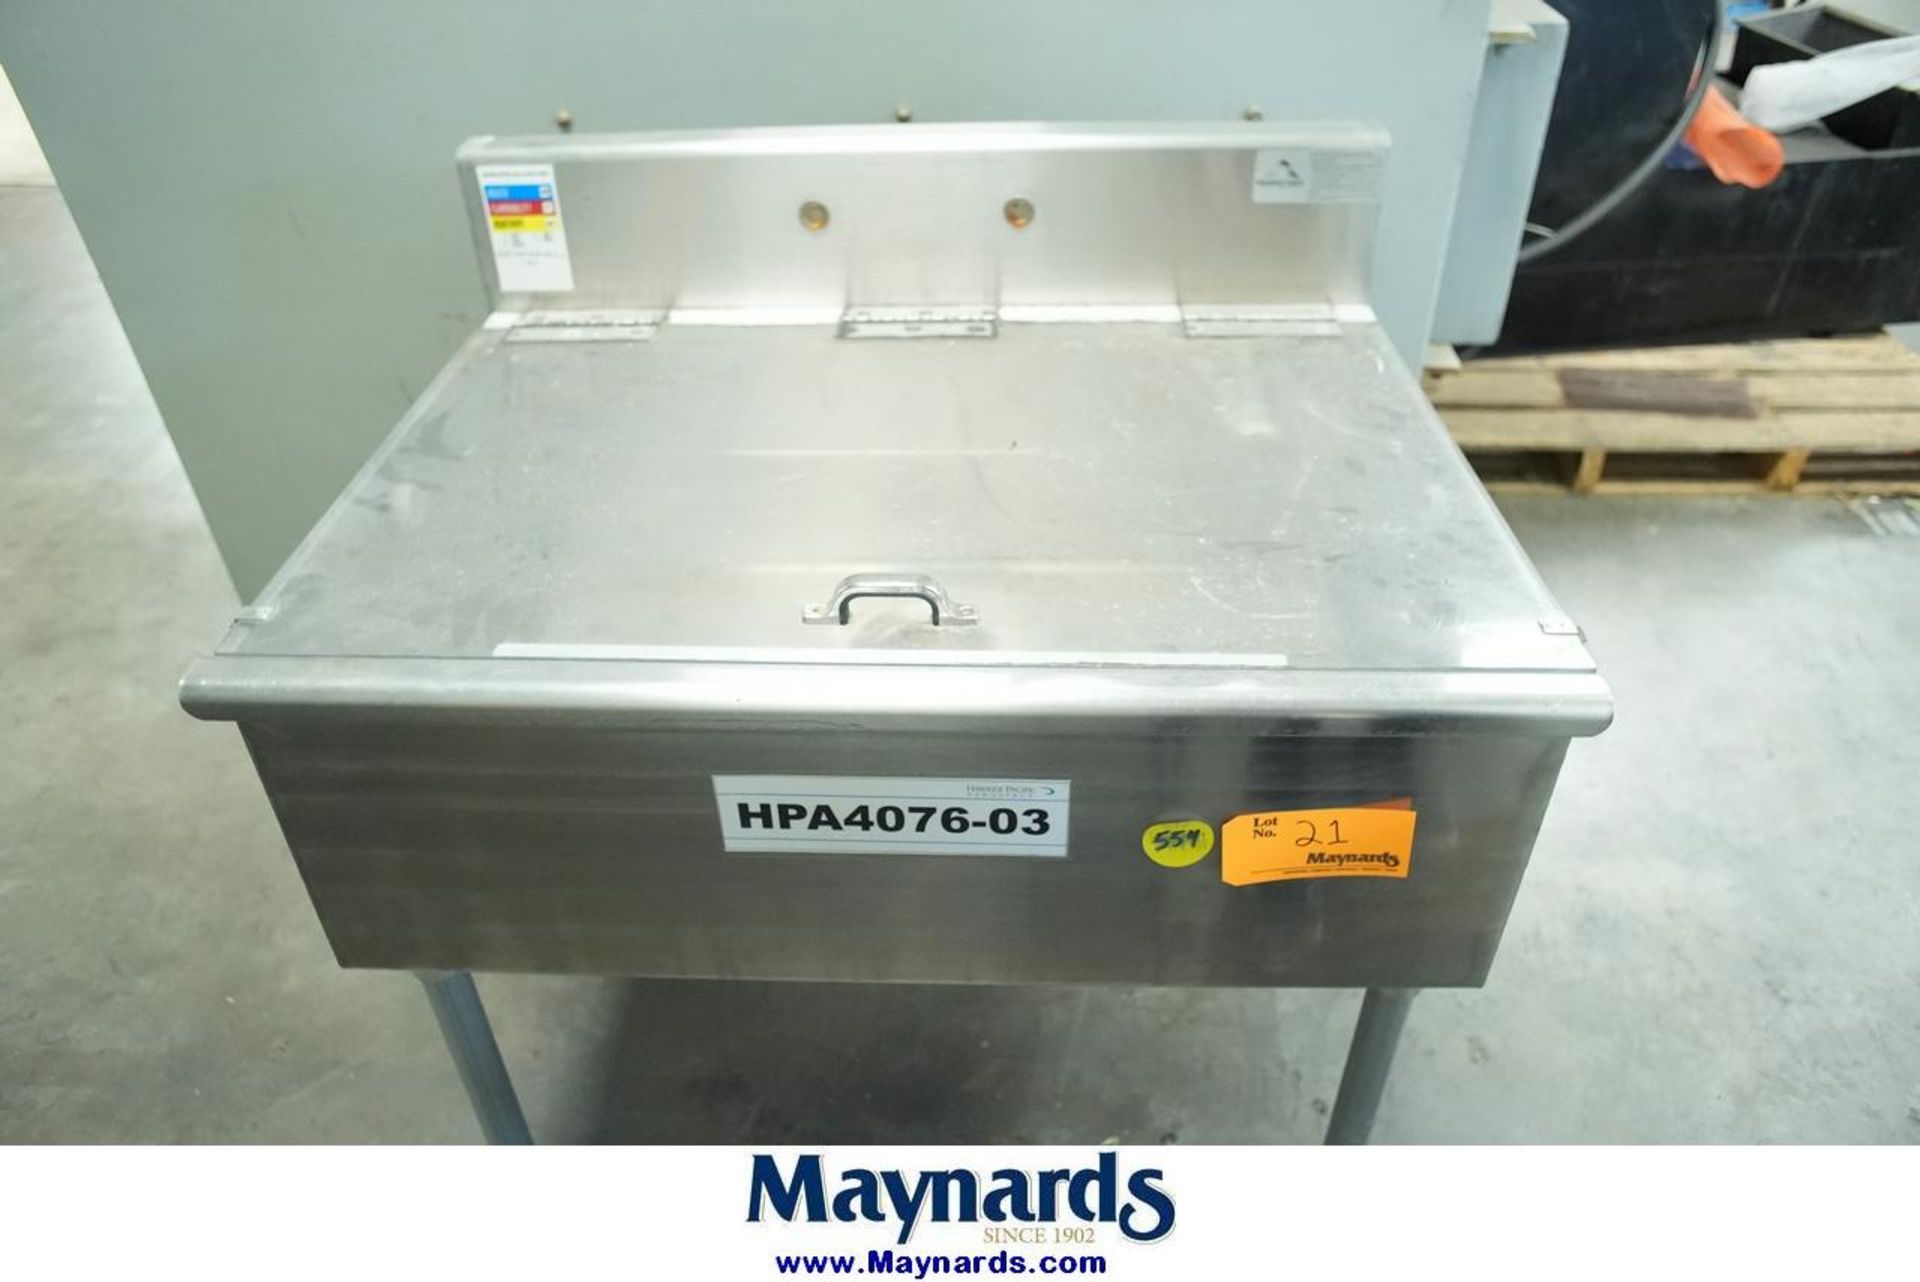 Advance Tabco S/S Sink